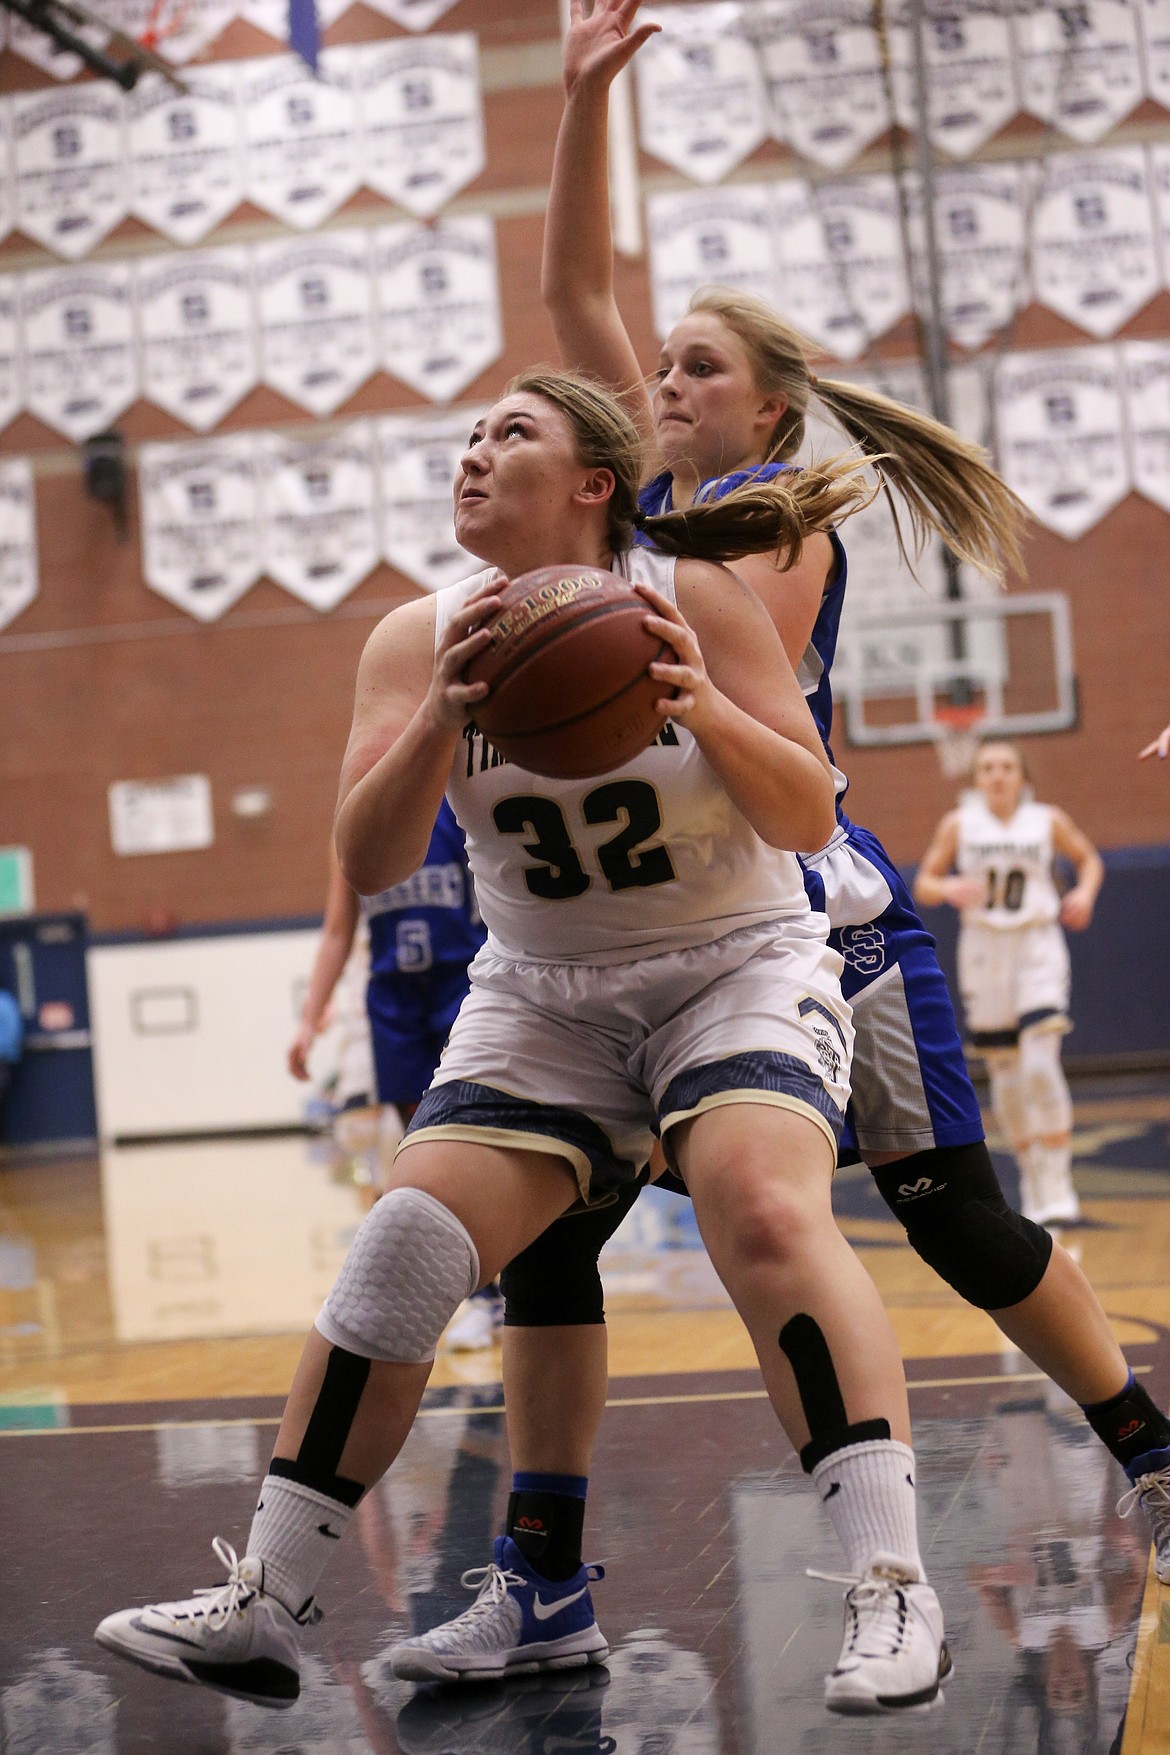 JASON DUCHOW PHOTOGRAPHY
Kaylee Jezek of Timberlake looks to score against Sugar-Salem in a state 3A semifinal Friday night at Skyview High in Nampa.